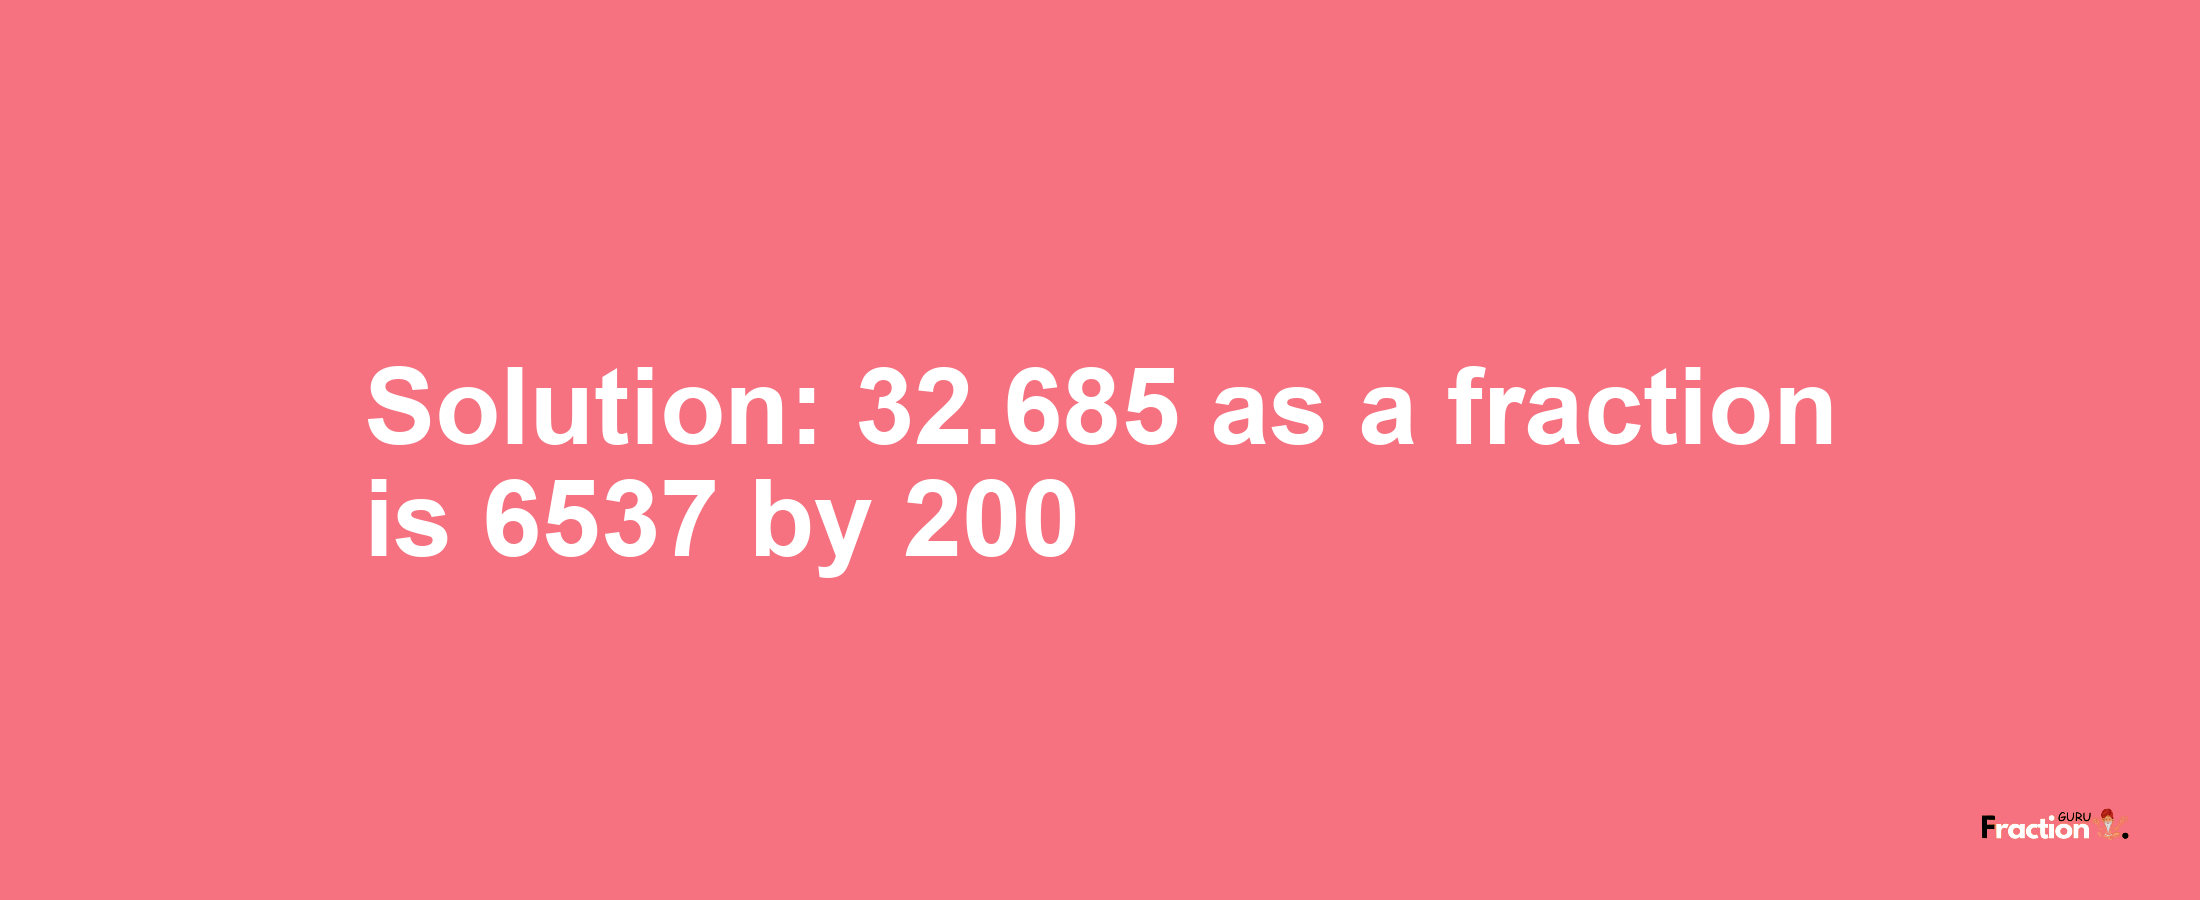 Solution:32.685 as a fraction is 6537/200